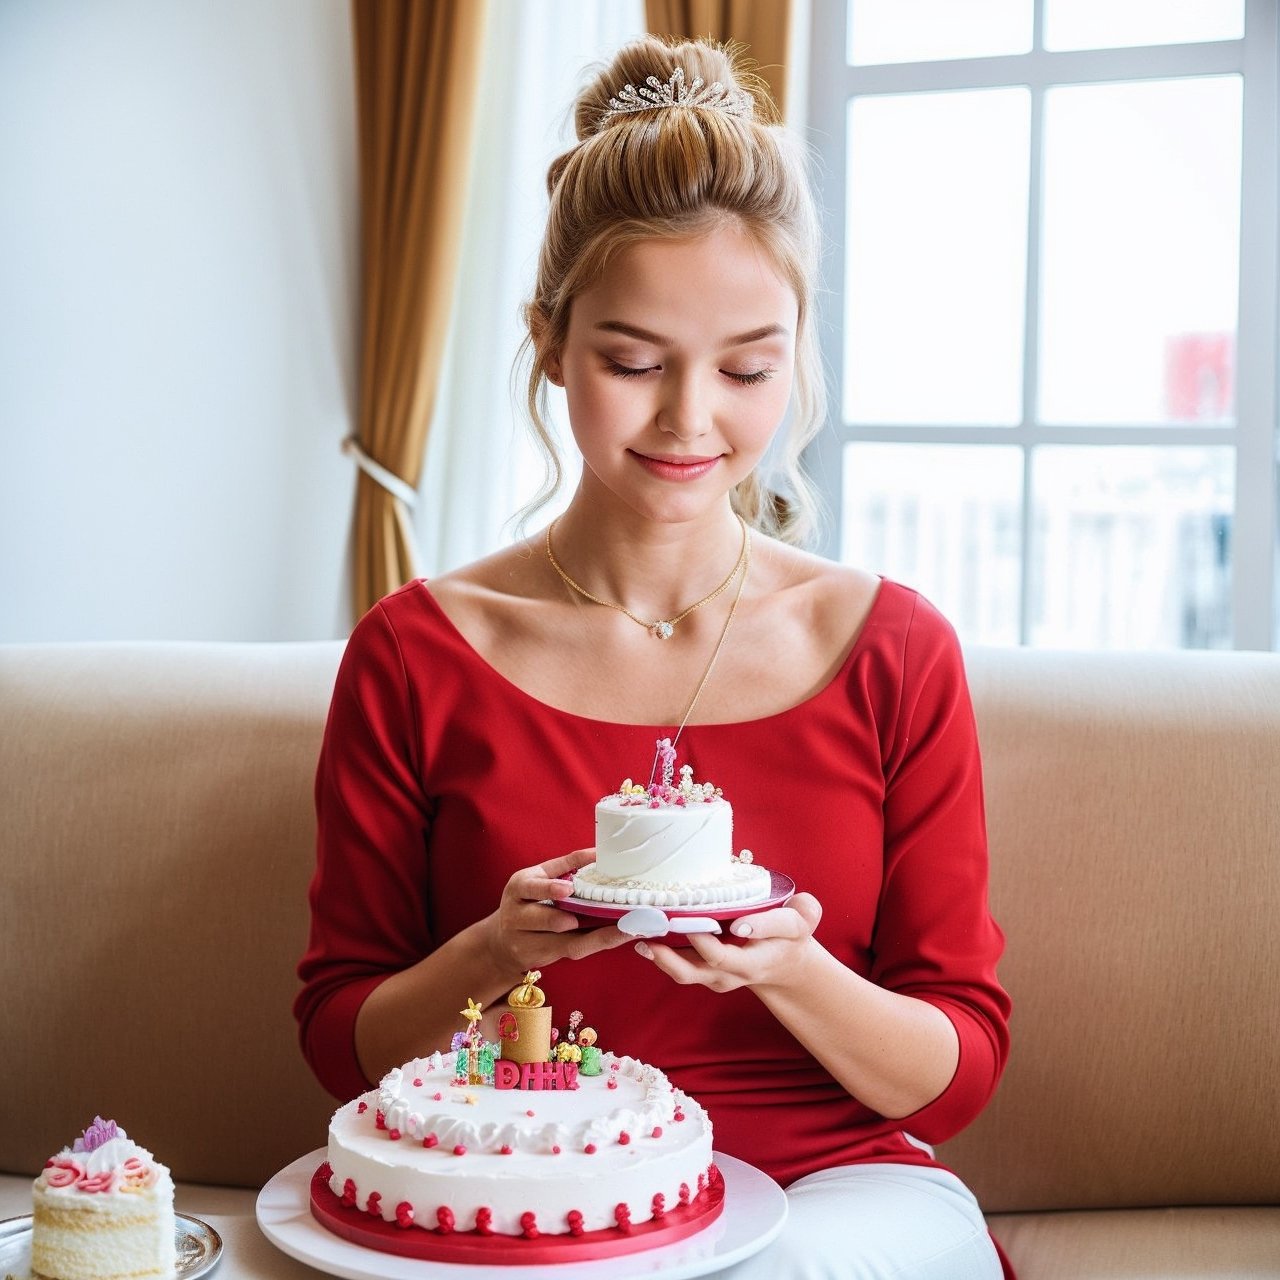 The woman is sitting on the sofa with a small white Pomeranian crawling on her lap, opposite a birthday cake, making a wish to the birthday cake, celebrating her birthday, she is about 1 6 years old, white skin, delicate facial features